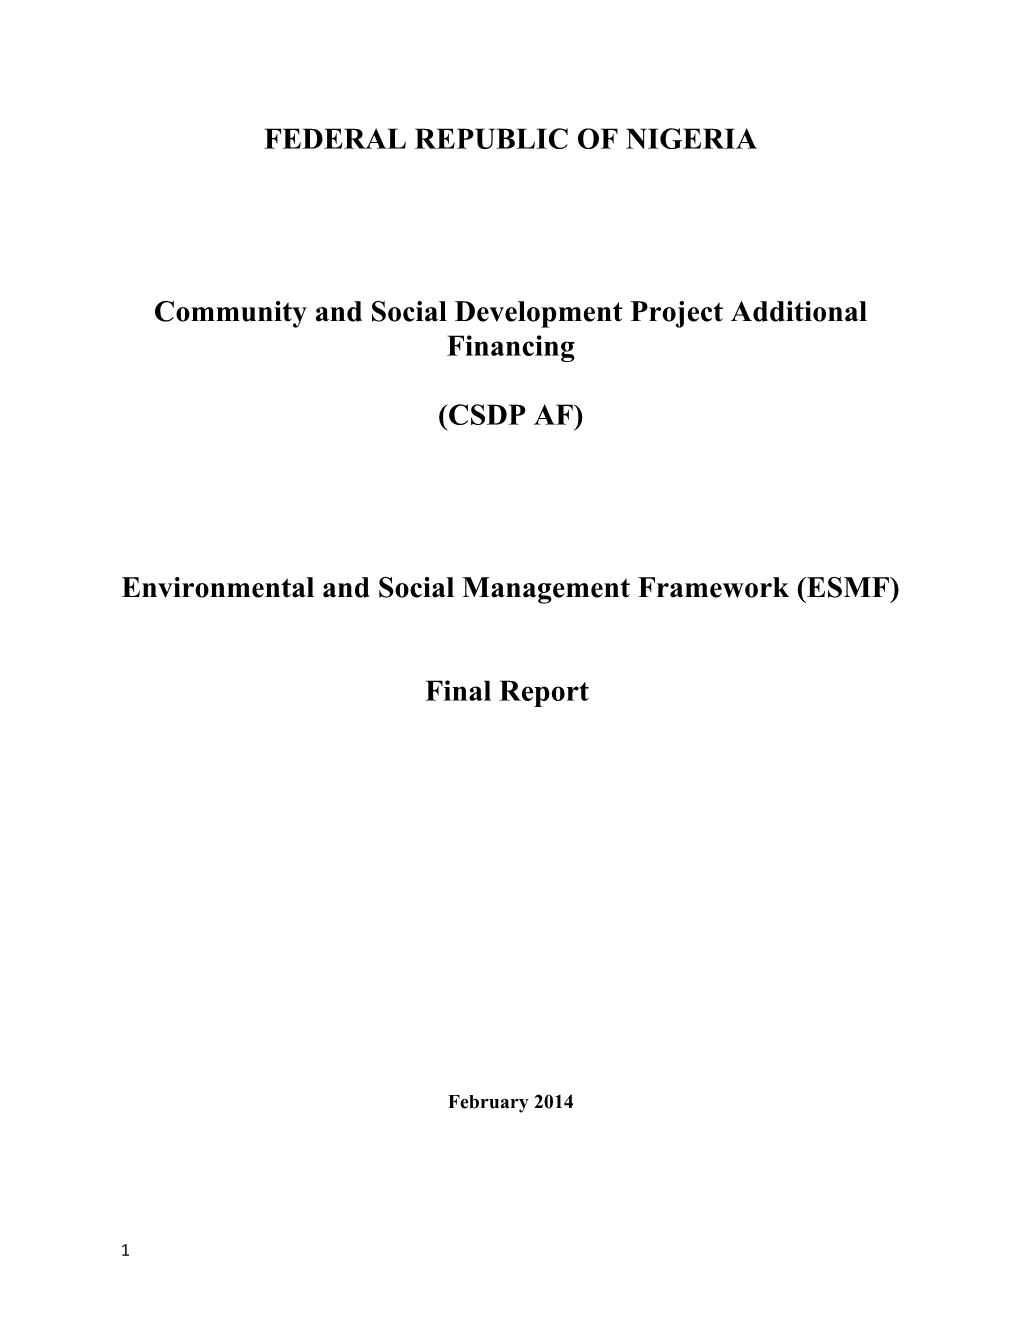 Community and Social Development Project Additional Financing